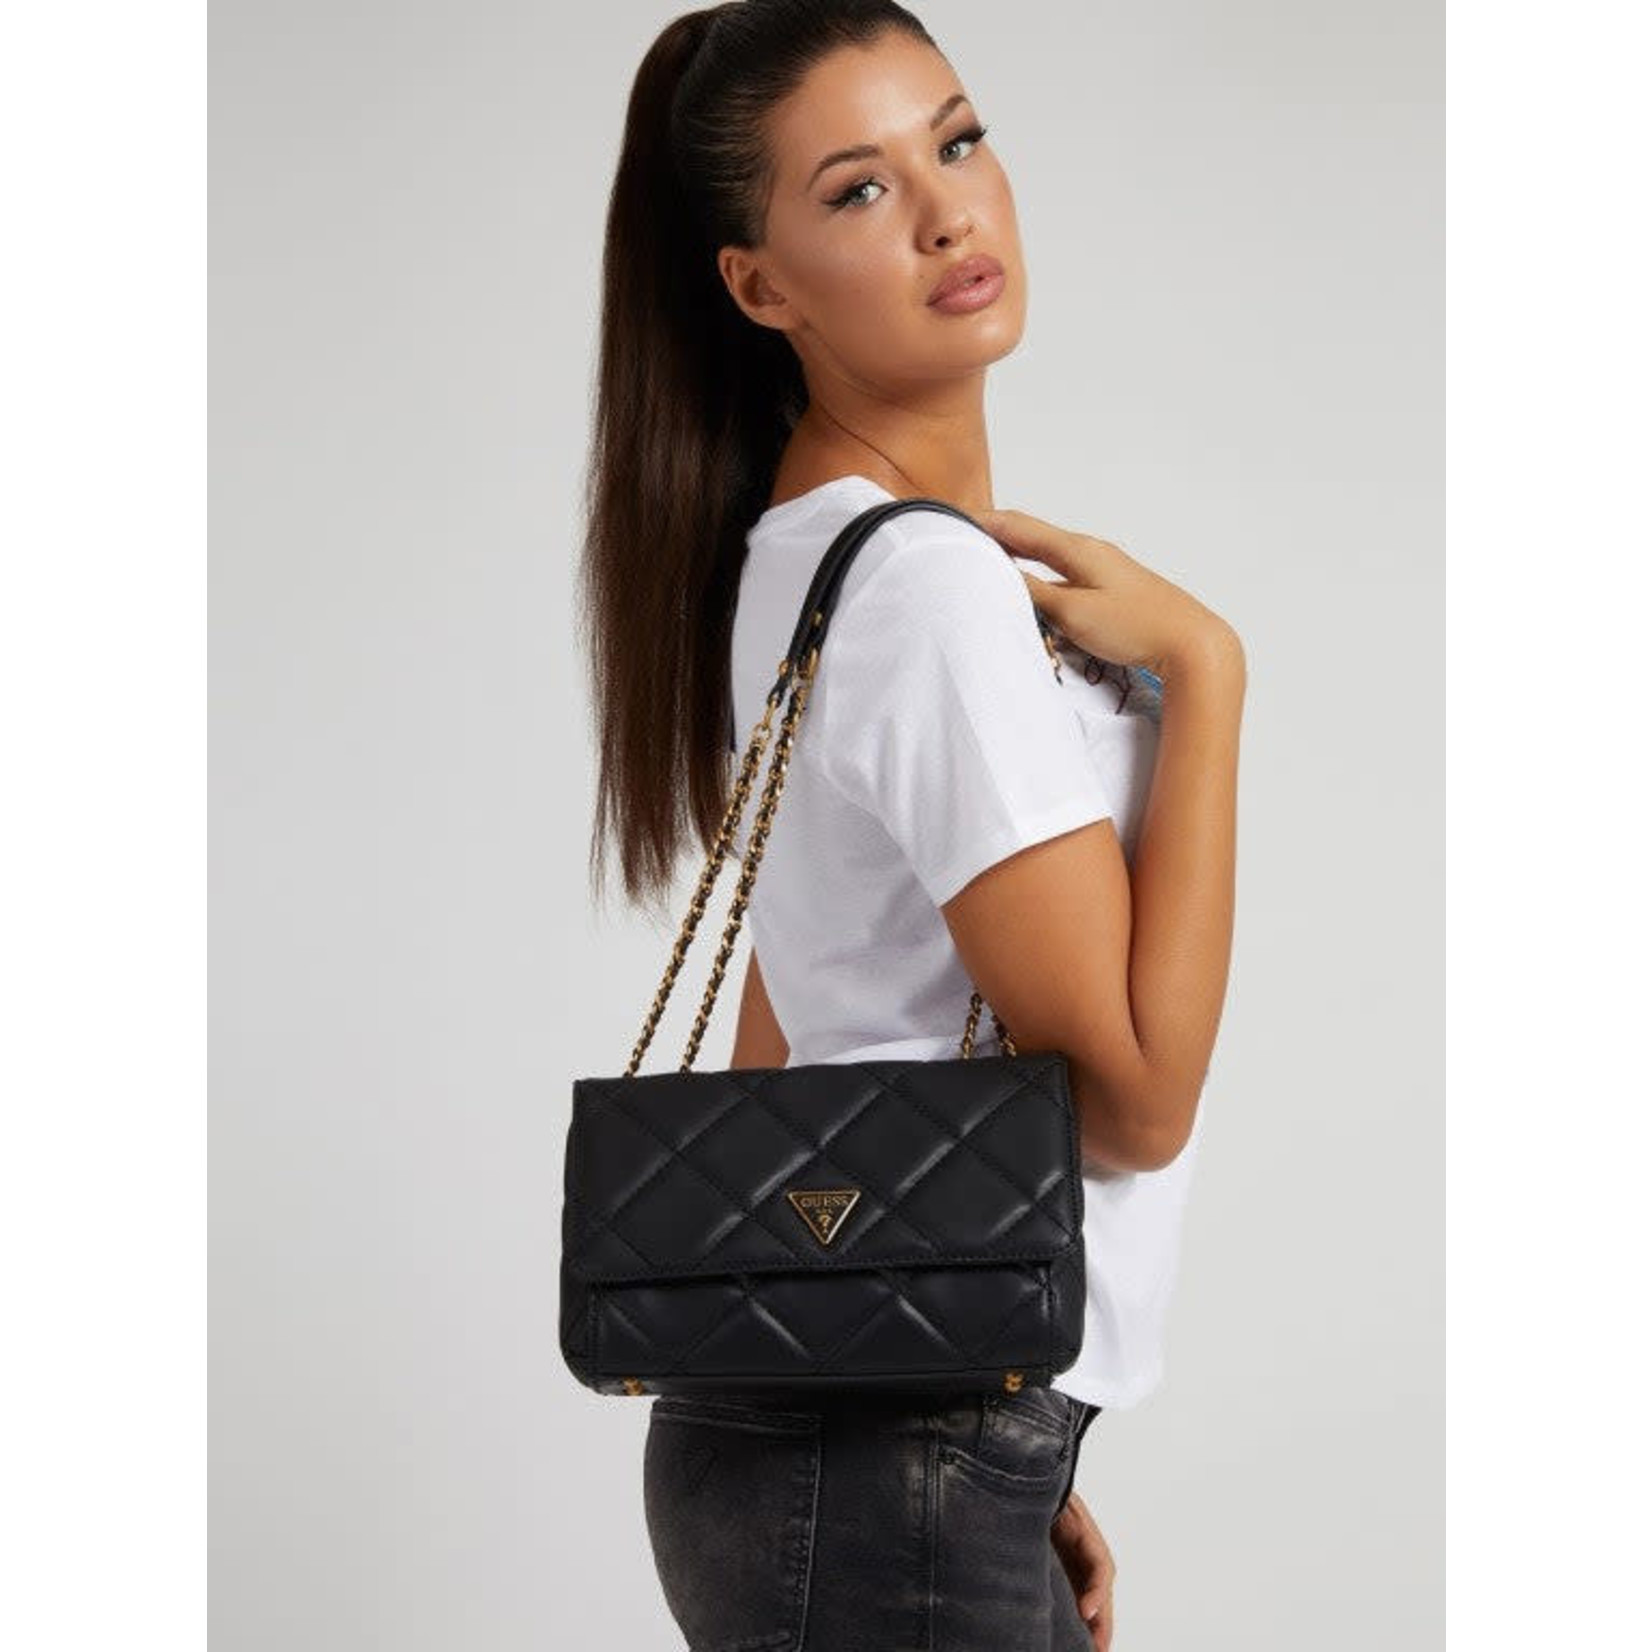 Guess Cessily Convertible Crossbody Flap